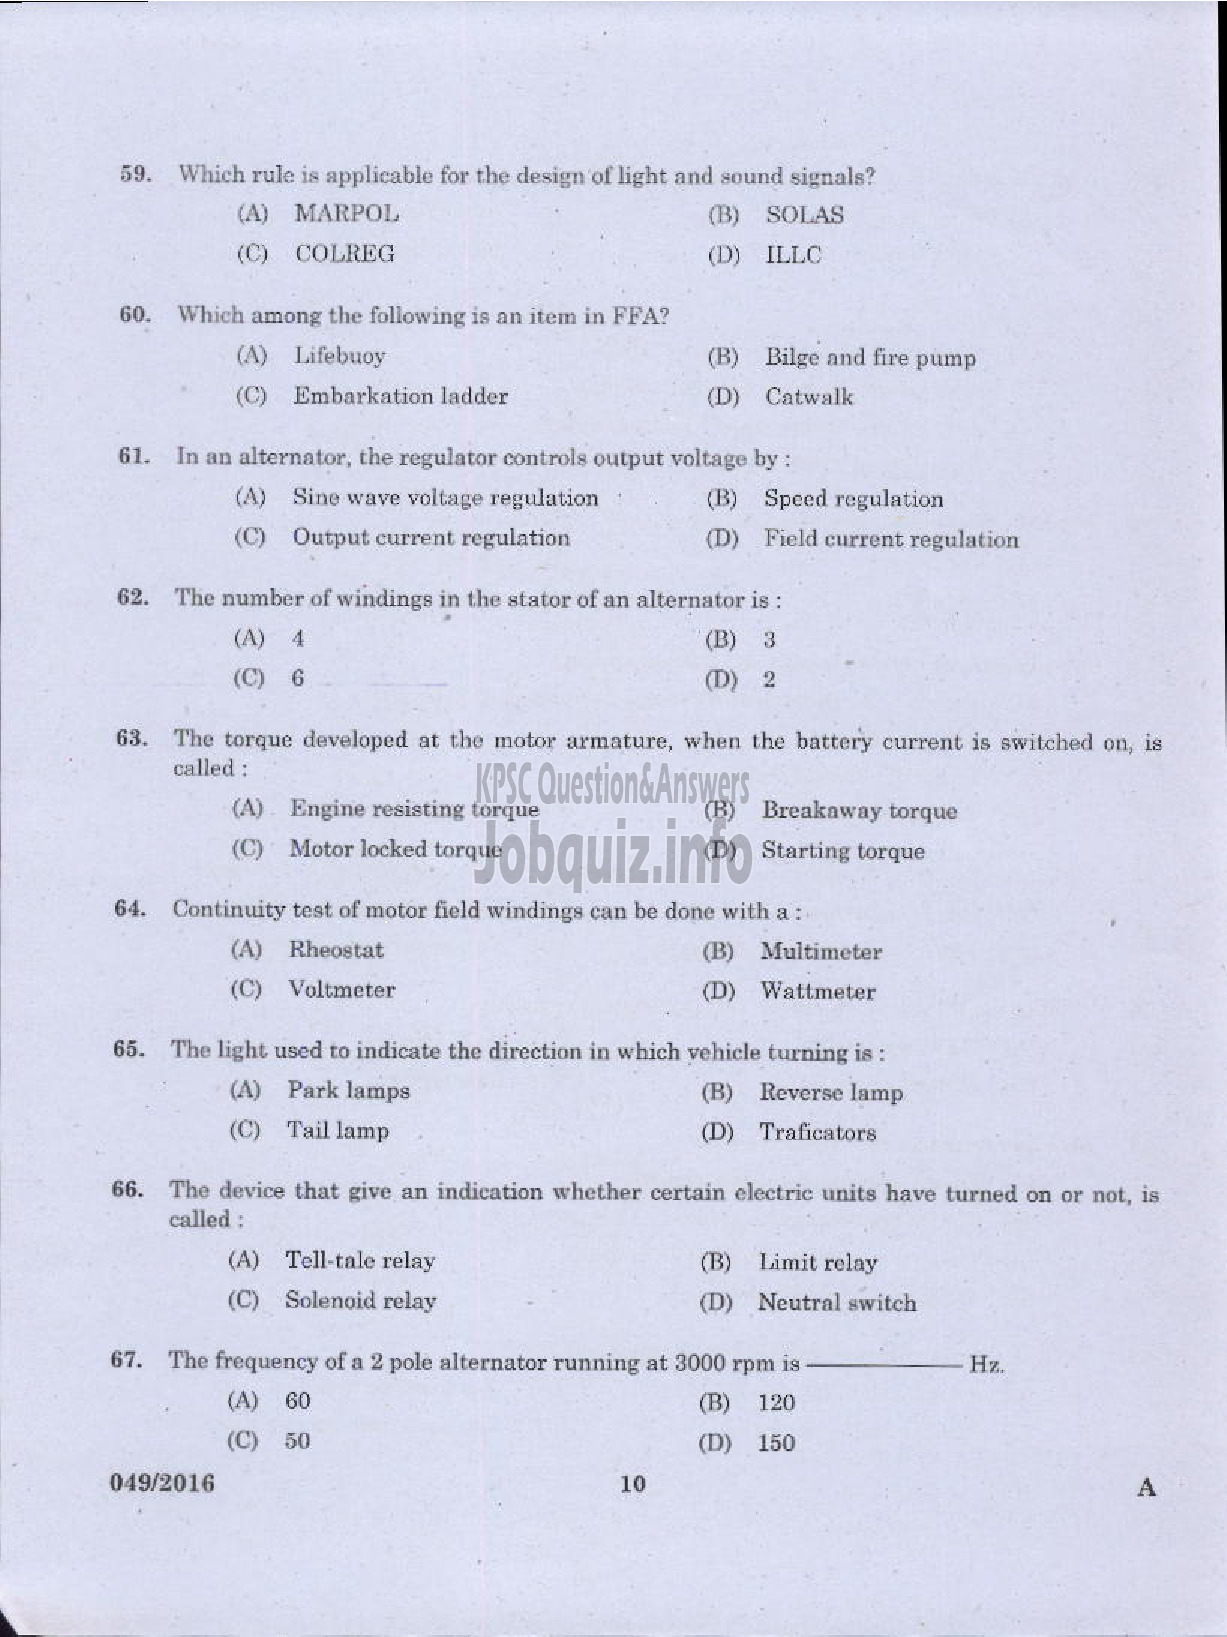 Kerala PSC Question Paper - WORKS MANAGER STATE WATER TRANSPORT-8